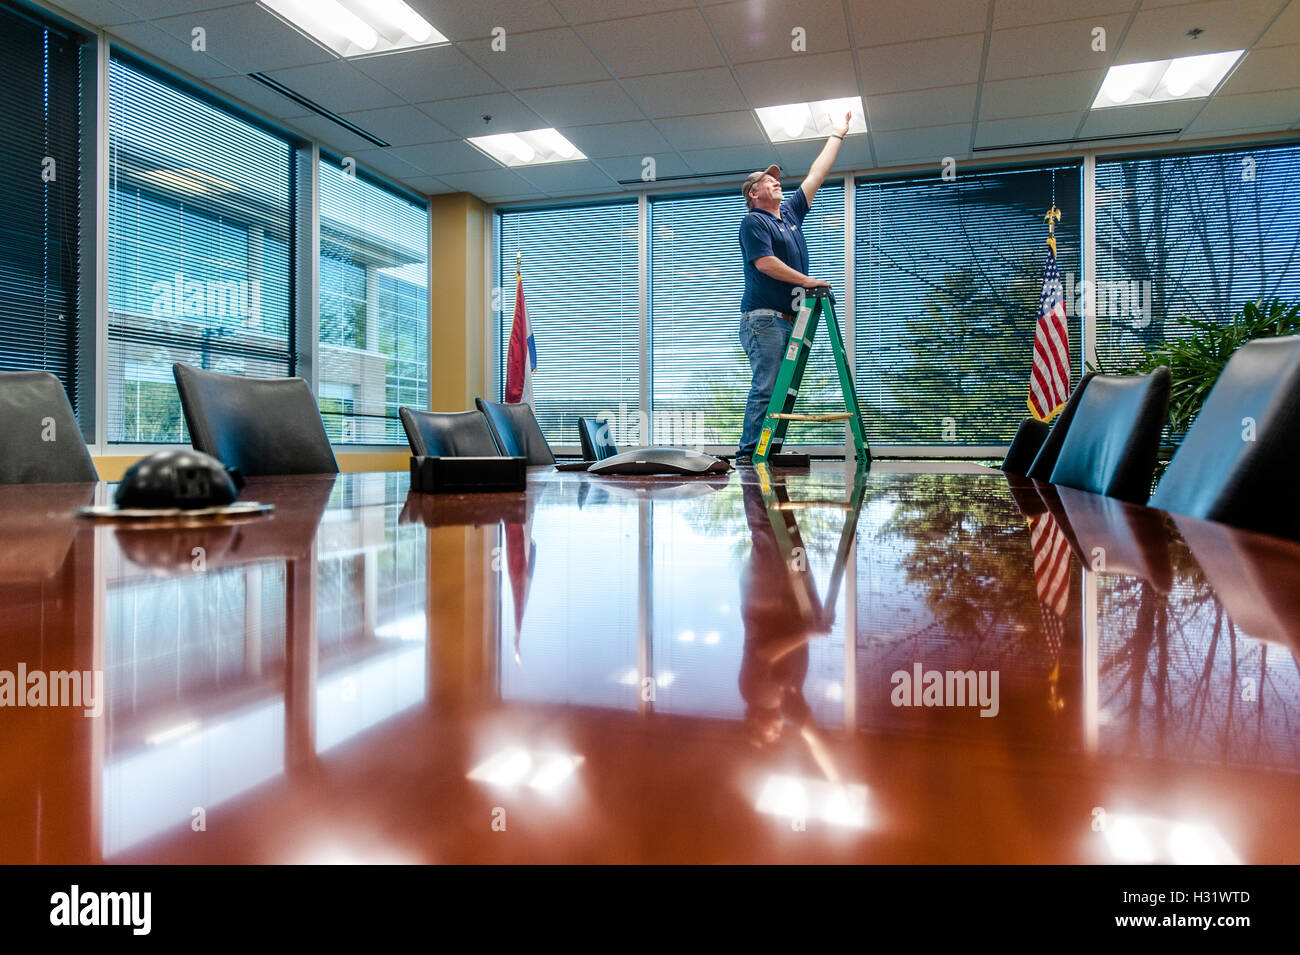 Maintenance man fixing a light in a conference room. Stock Photo